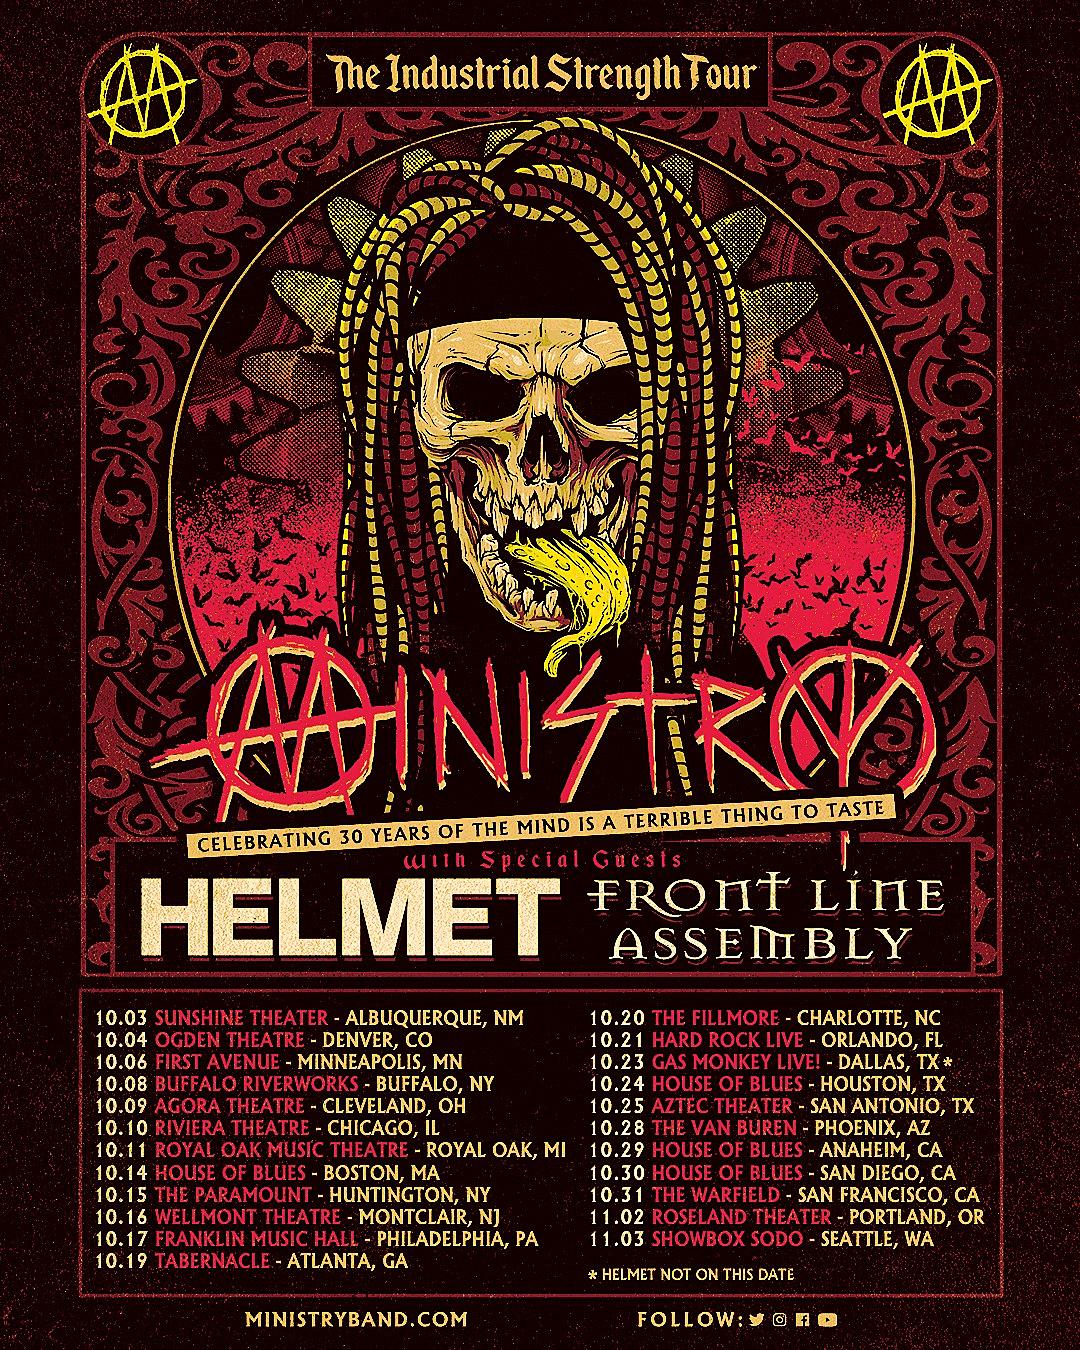 ministry tour dates, MINISTRY&#8217;s U.S. Tour Bumped To March/April 2022 Due To COVID-19 Concerns